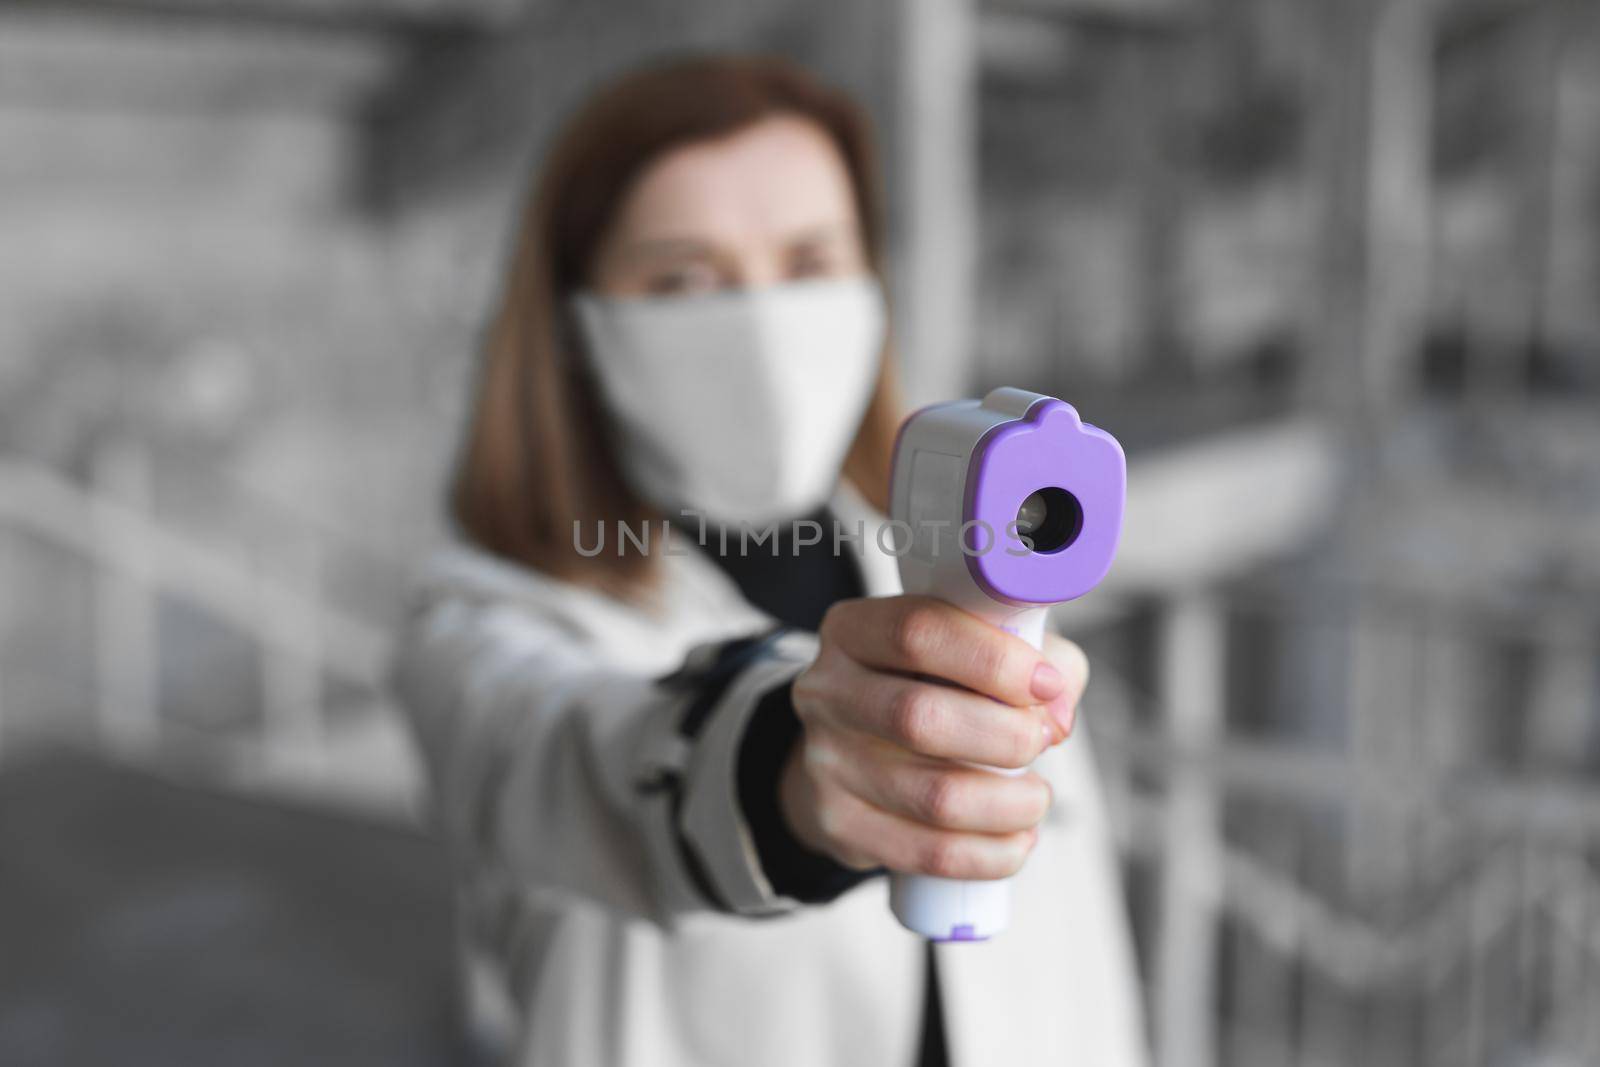 Coronavirus symptoms, woman in medical mask measures body temperature. Doctor looks at digital isometric non-contact thermometer in her hands, concept of covid-19 quarantine by StudioPeace